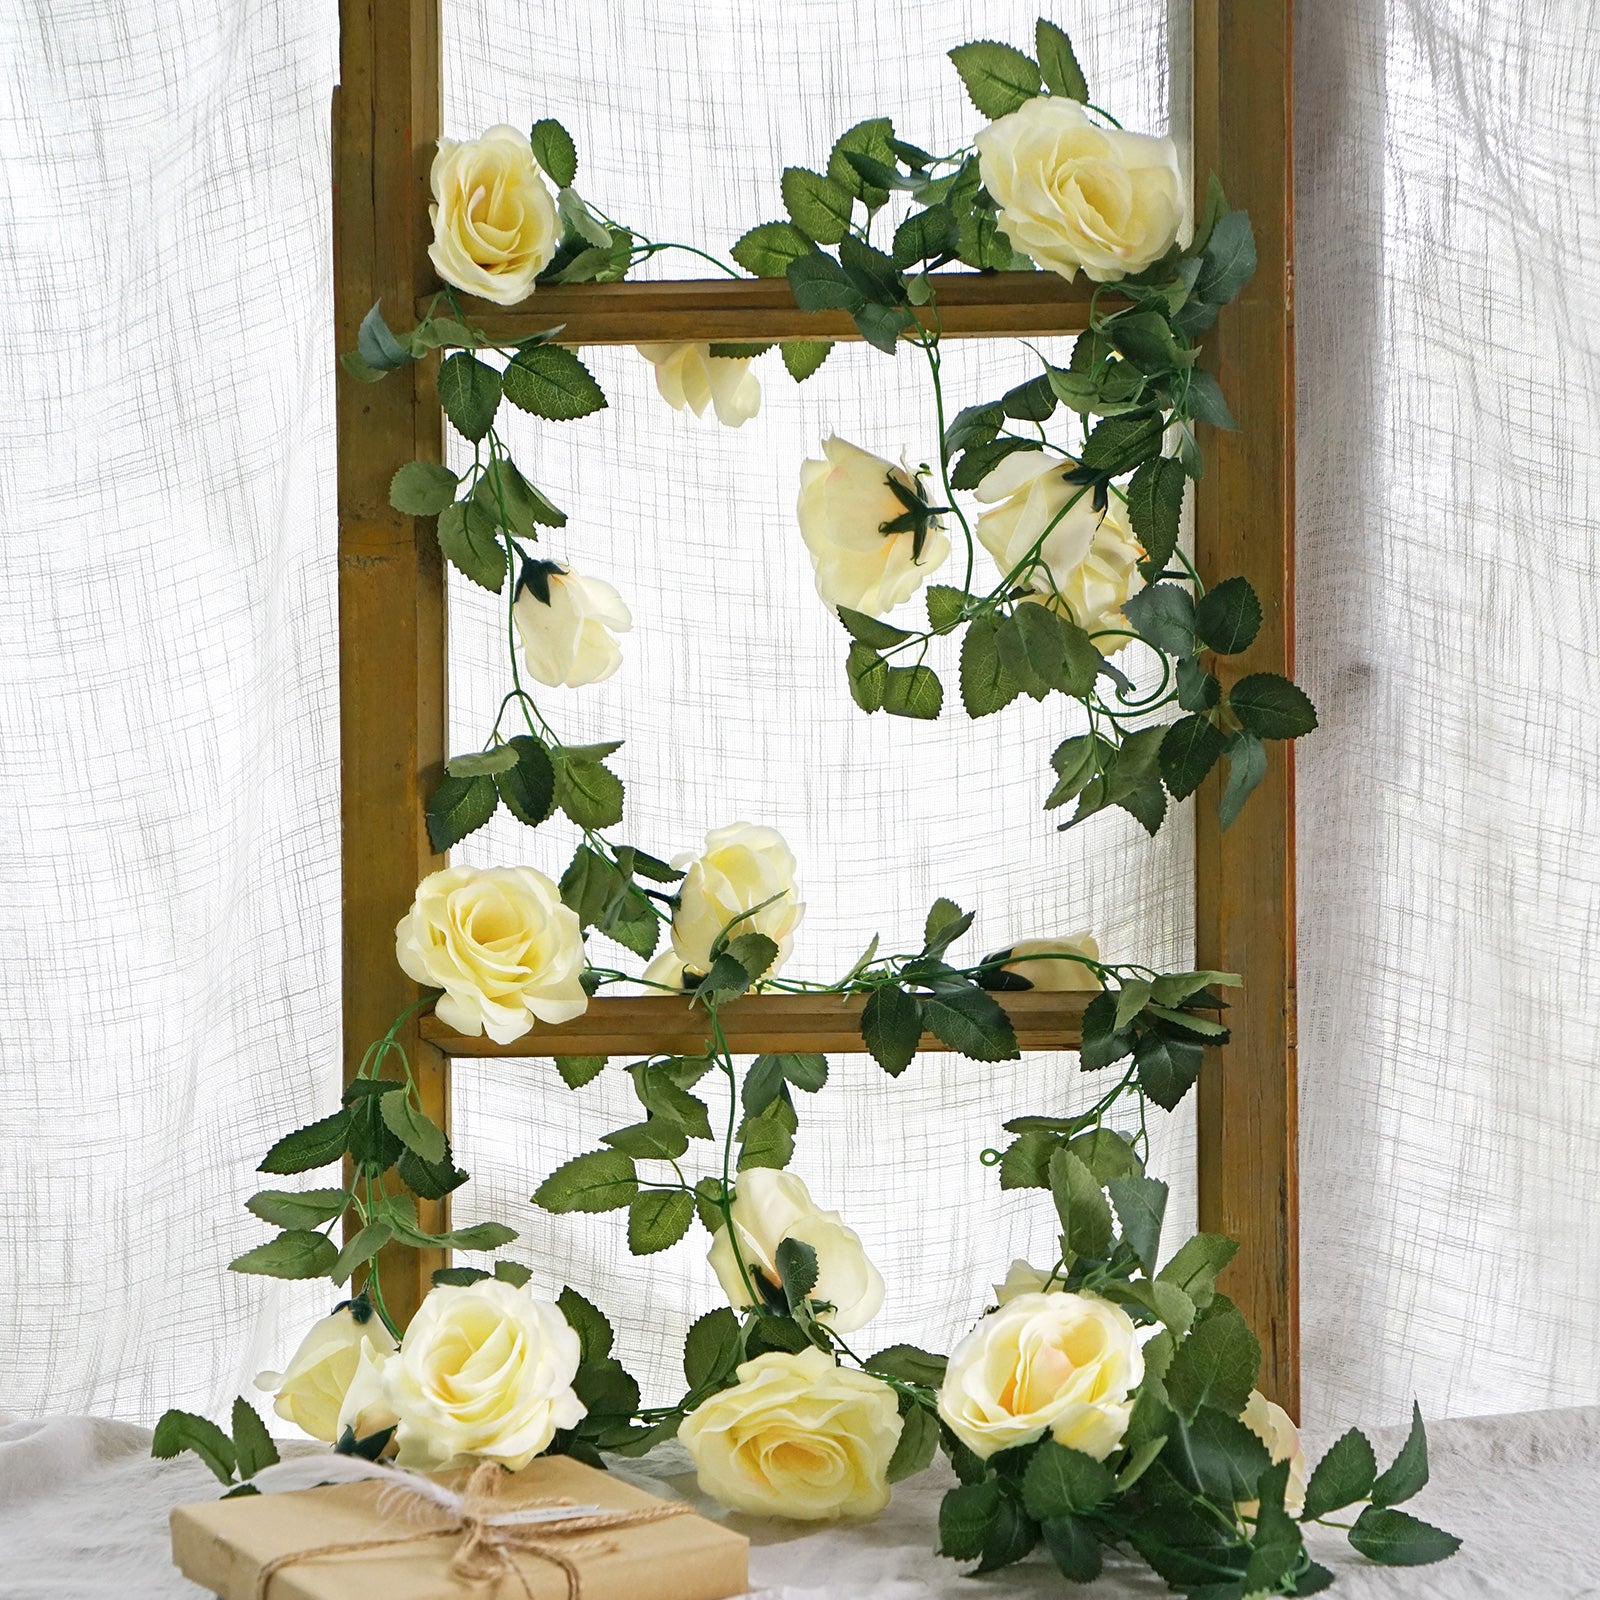 2 Bunches 14.4 ft of Cream White Artificial Silk Rose Vines Hanging Foliage Leaves